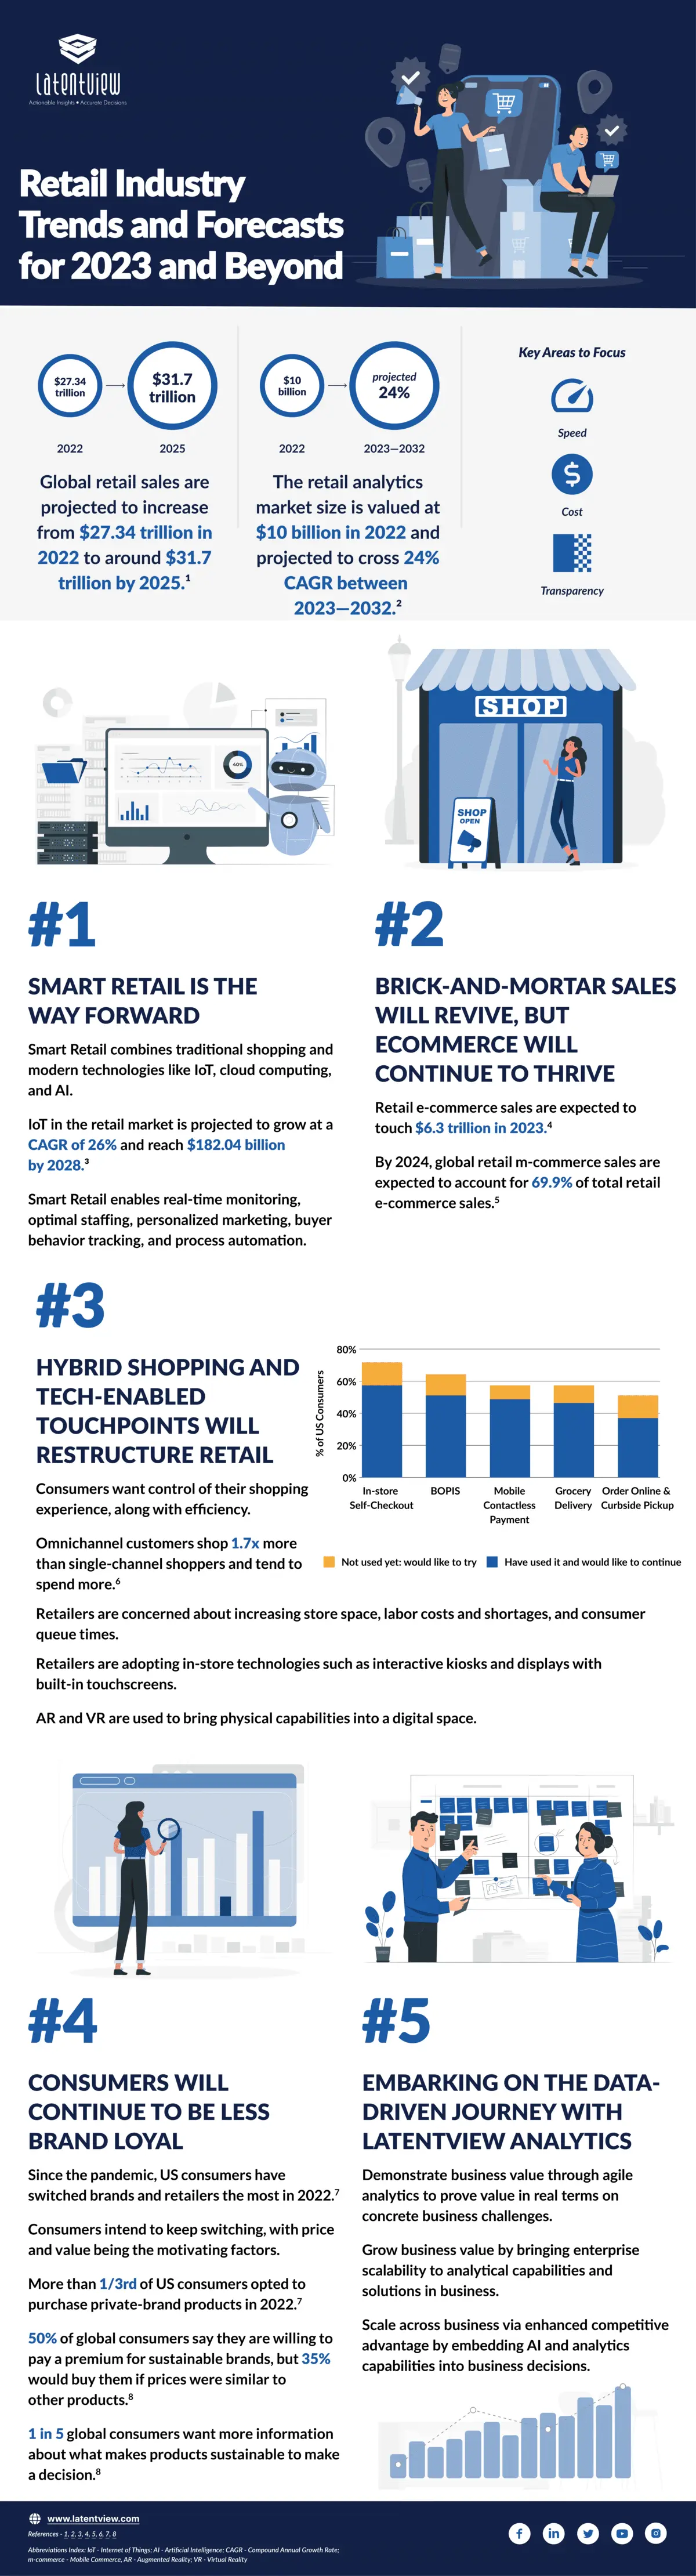 Retail Industry Trends And Forecasts For 2023 And Beyond Img V2.webp